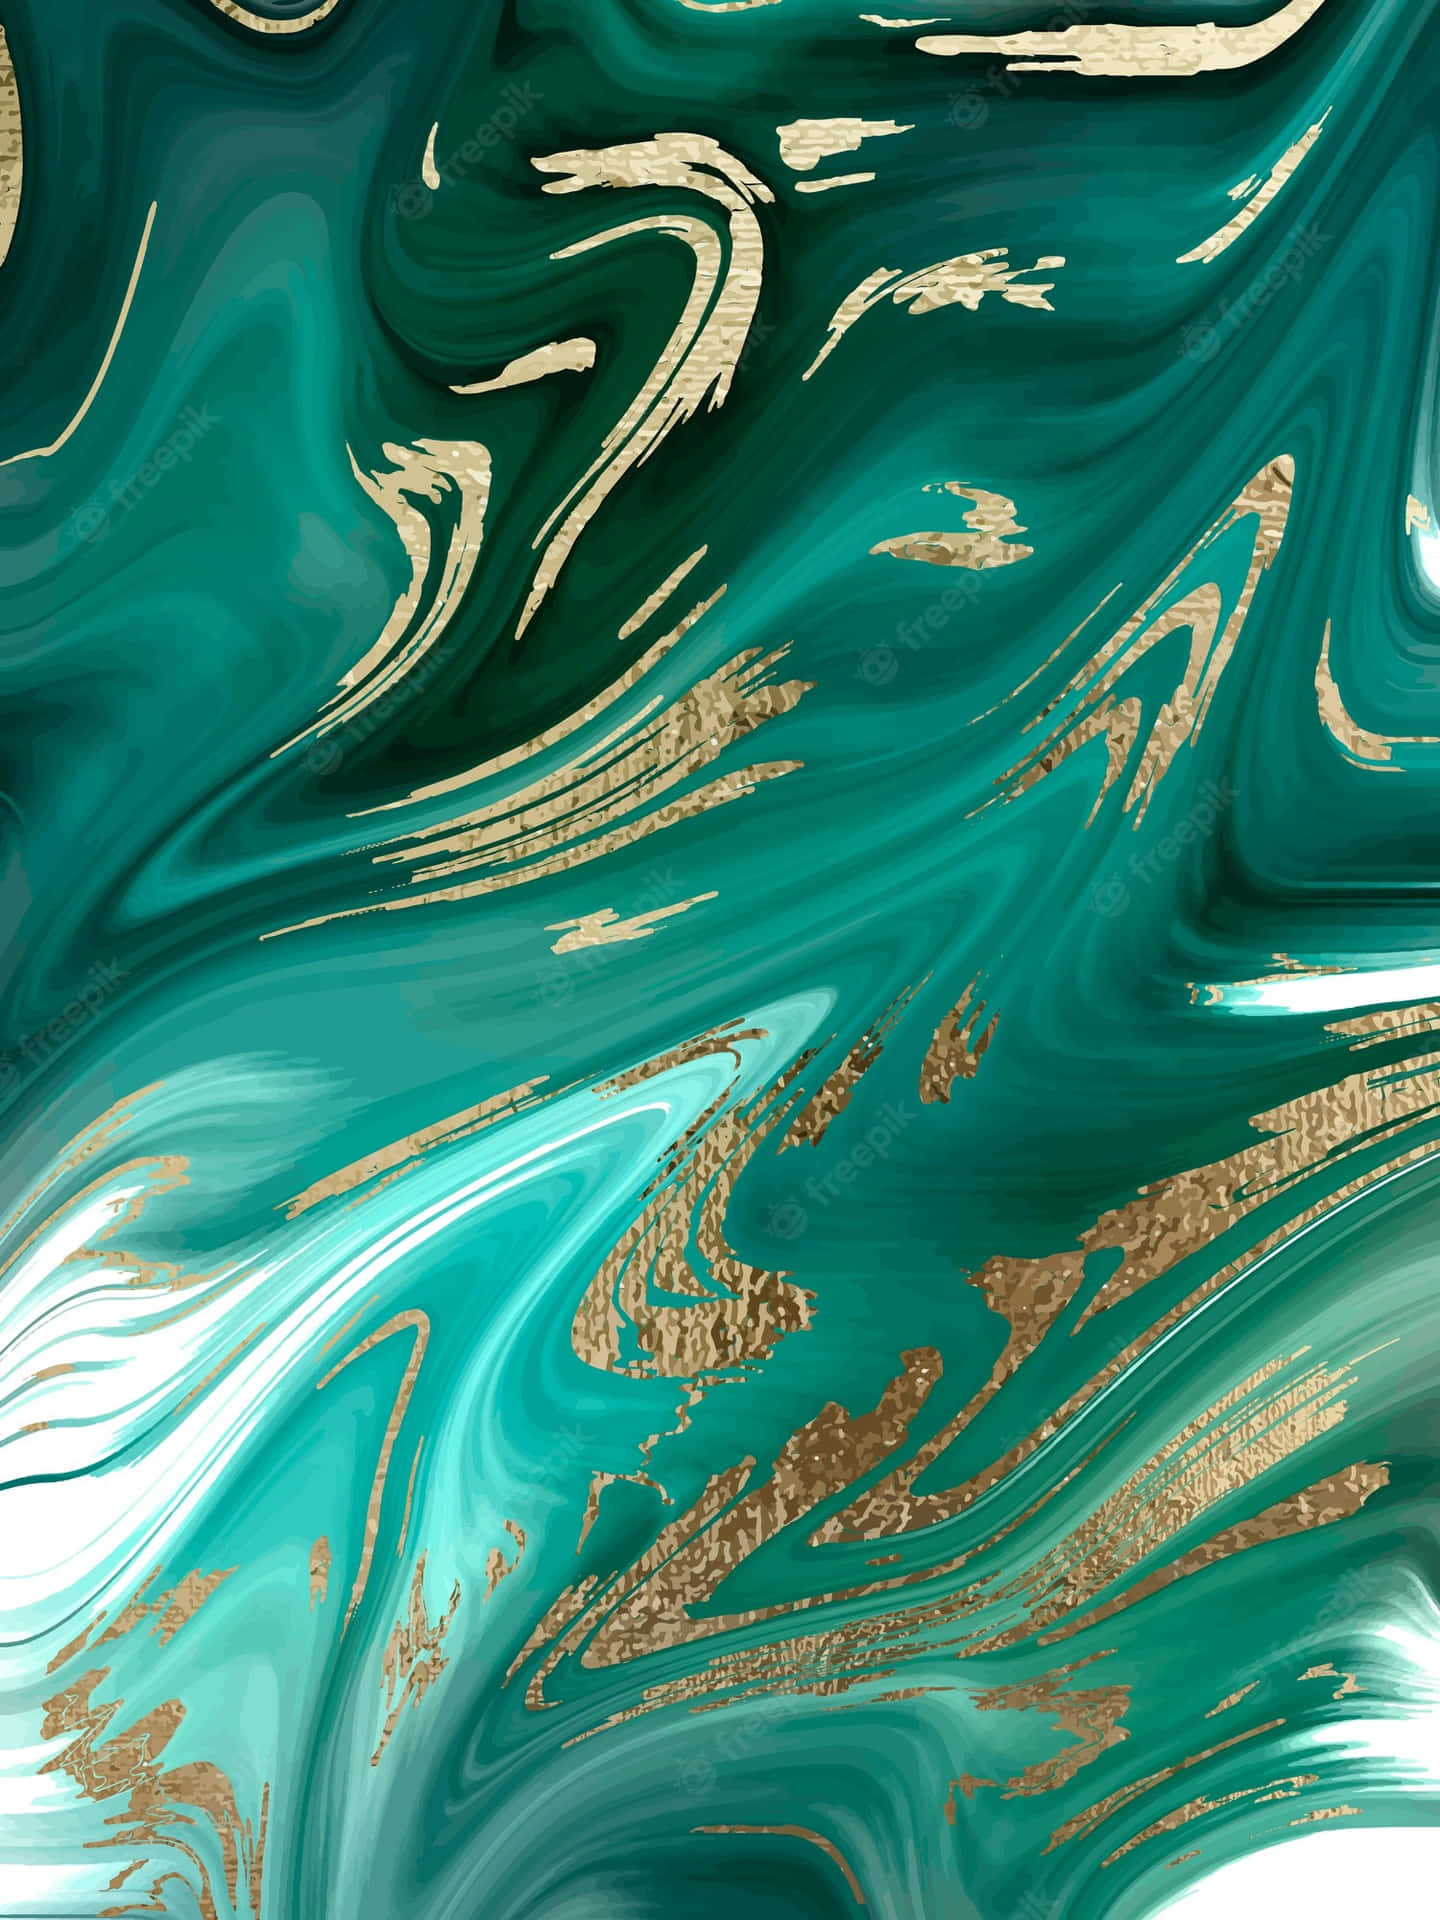 A Green And Gold Swirled Abstract Painting Wallpaper